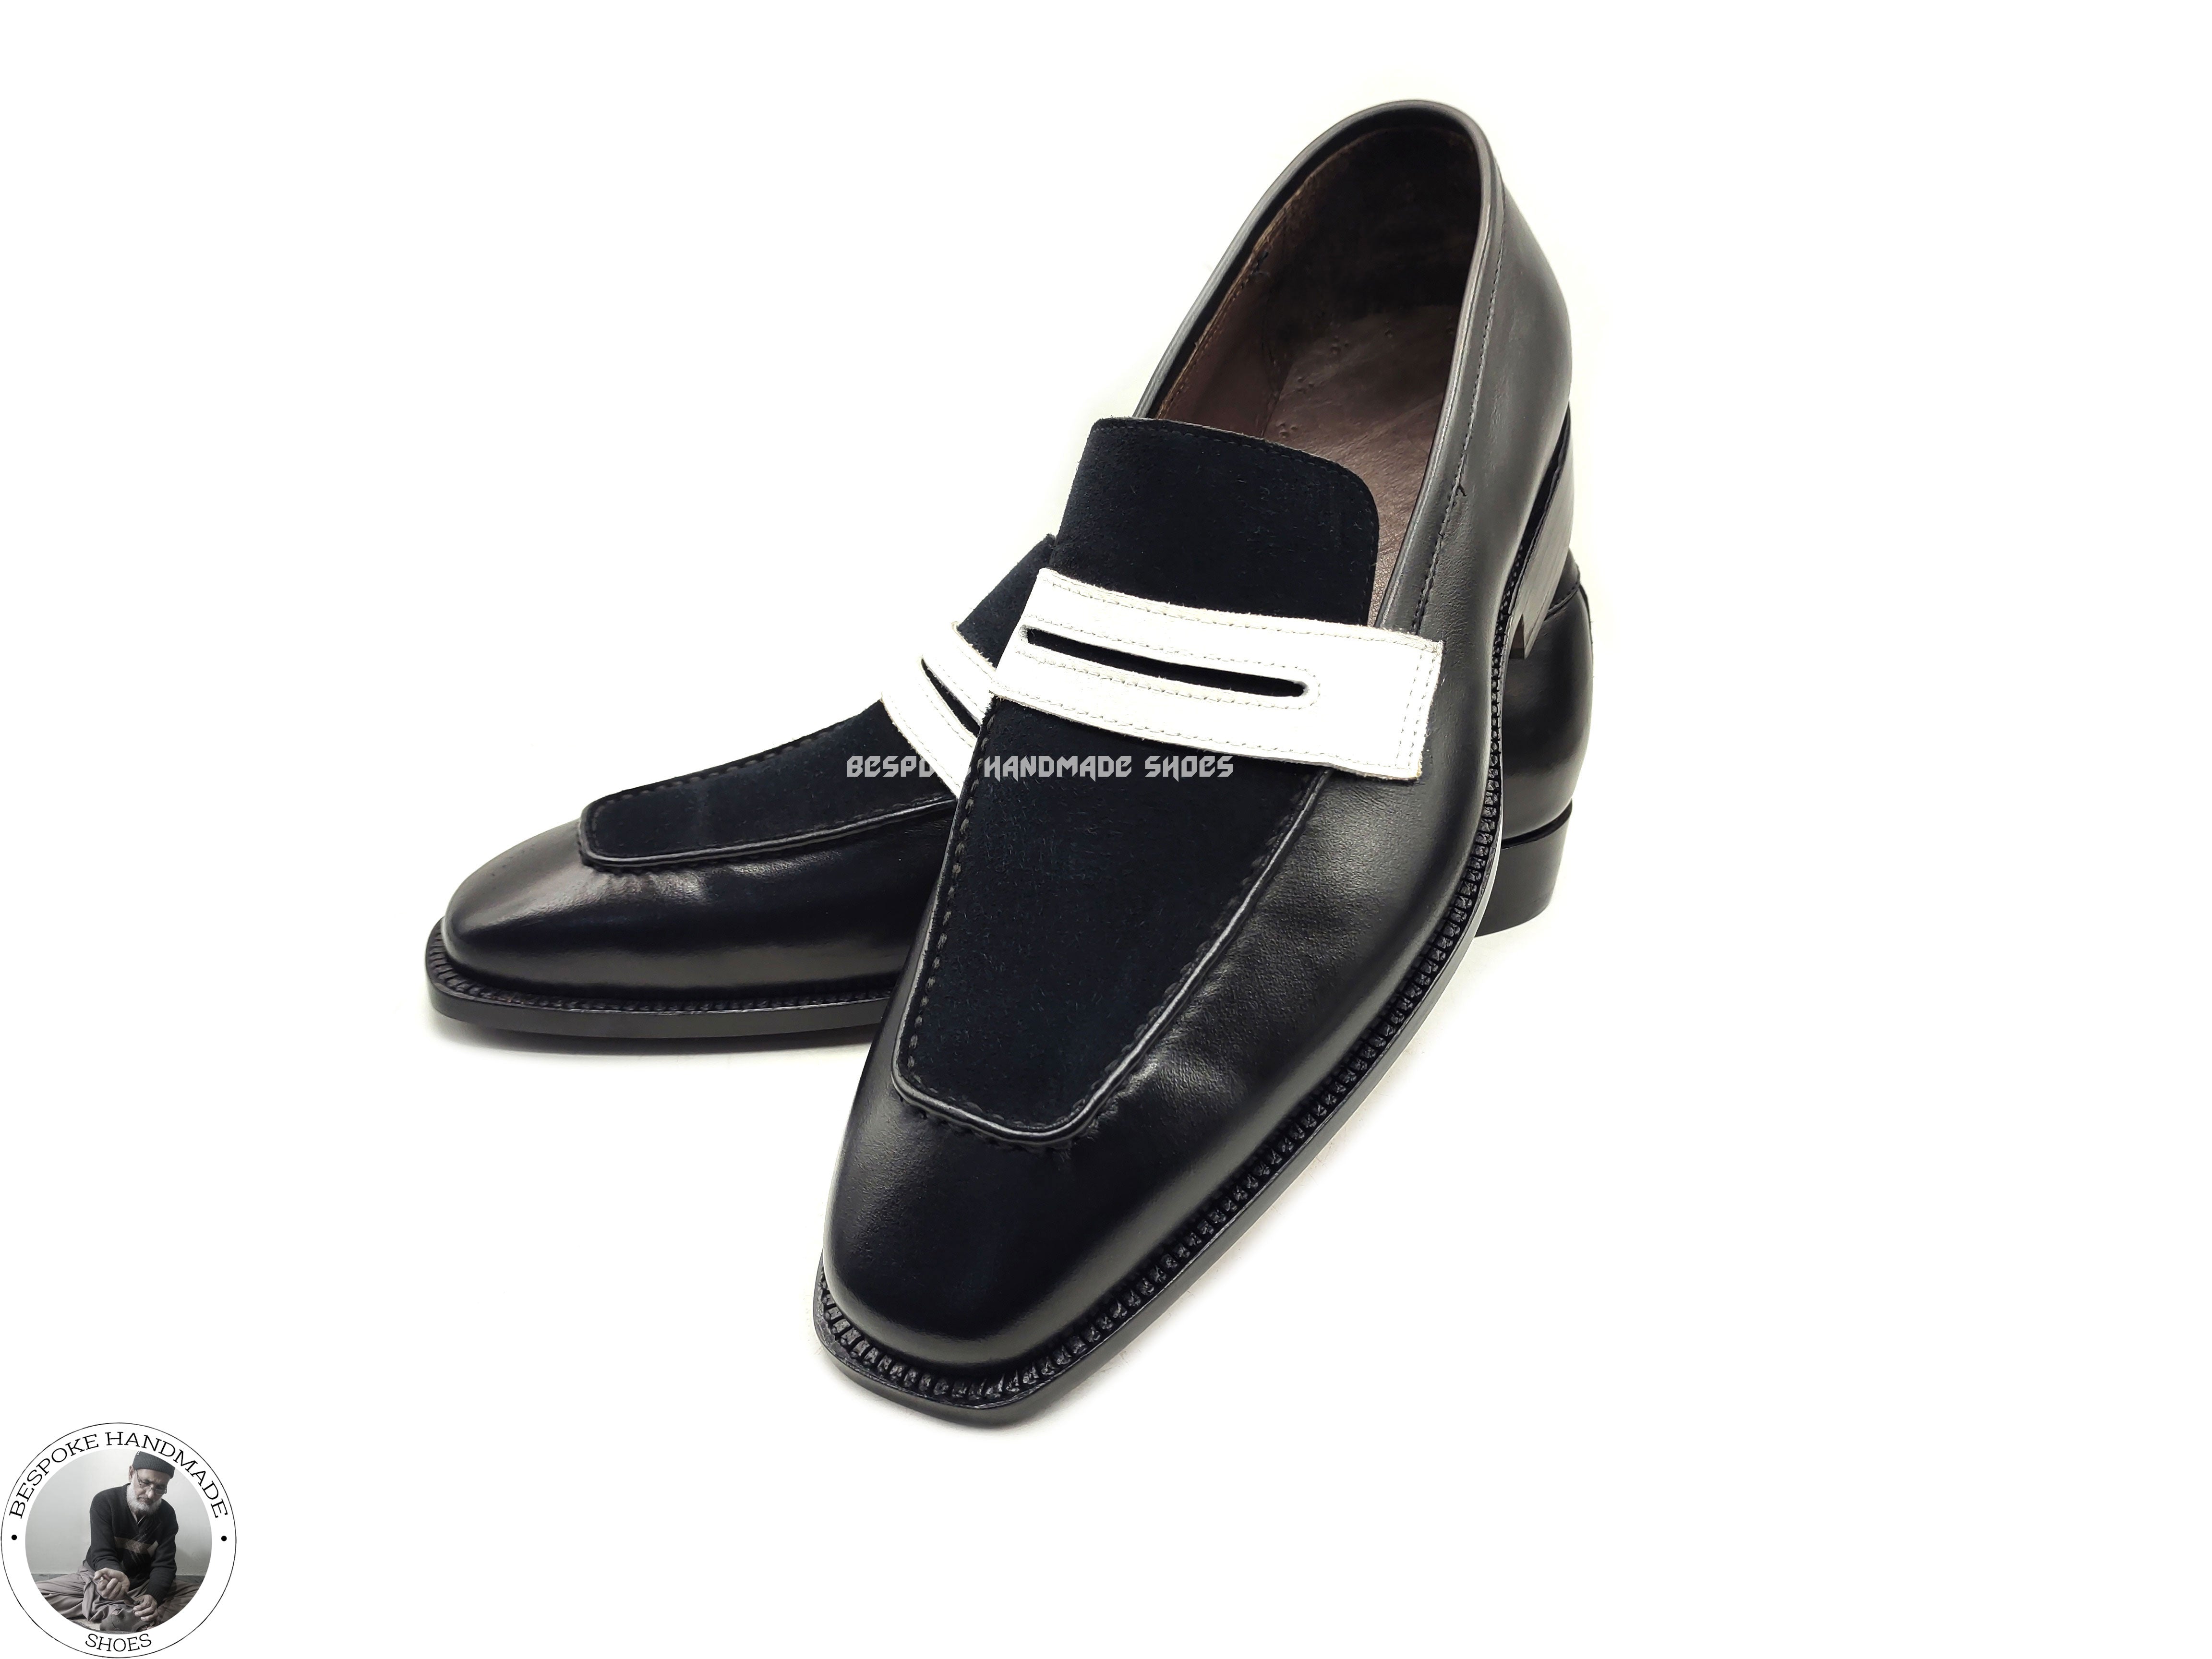 Men's Handcrafted Leather Shoes, Black and White Leather Suede Slip on Casual Shoes